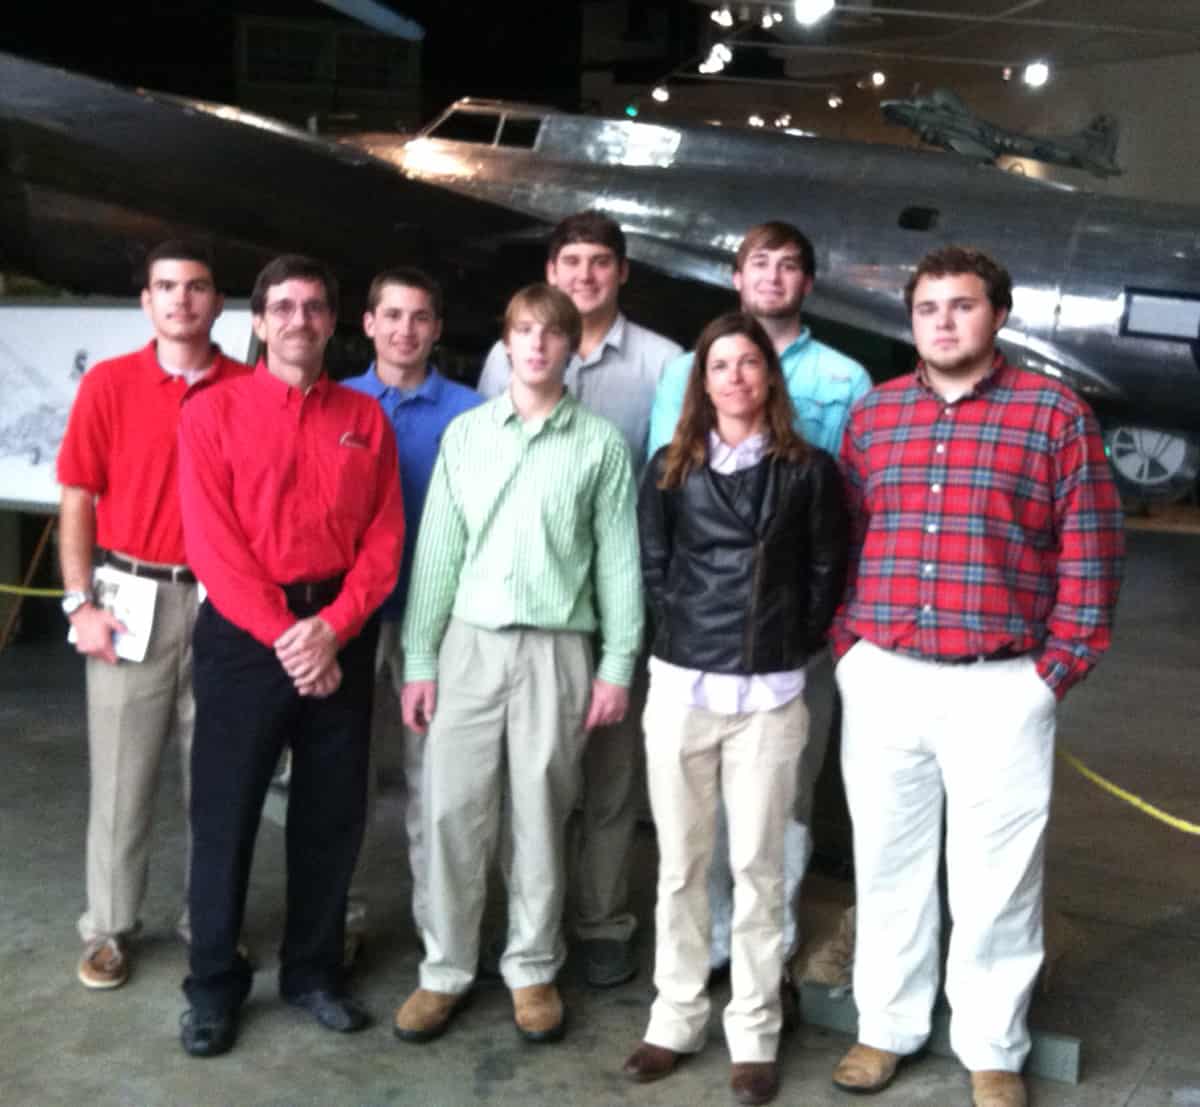 Mike Cochran is shown above with a group of his former students. This was one of the last field trips that he took with students before his retirement in 2012.